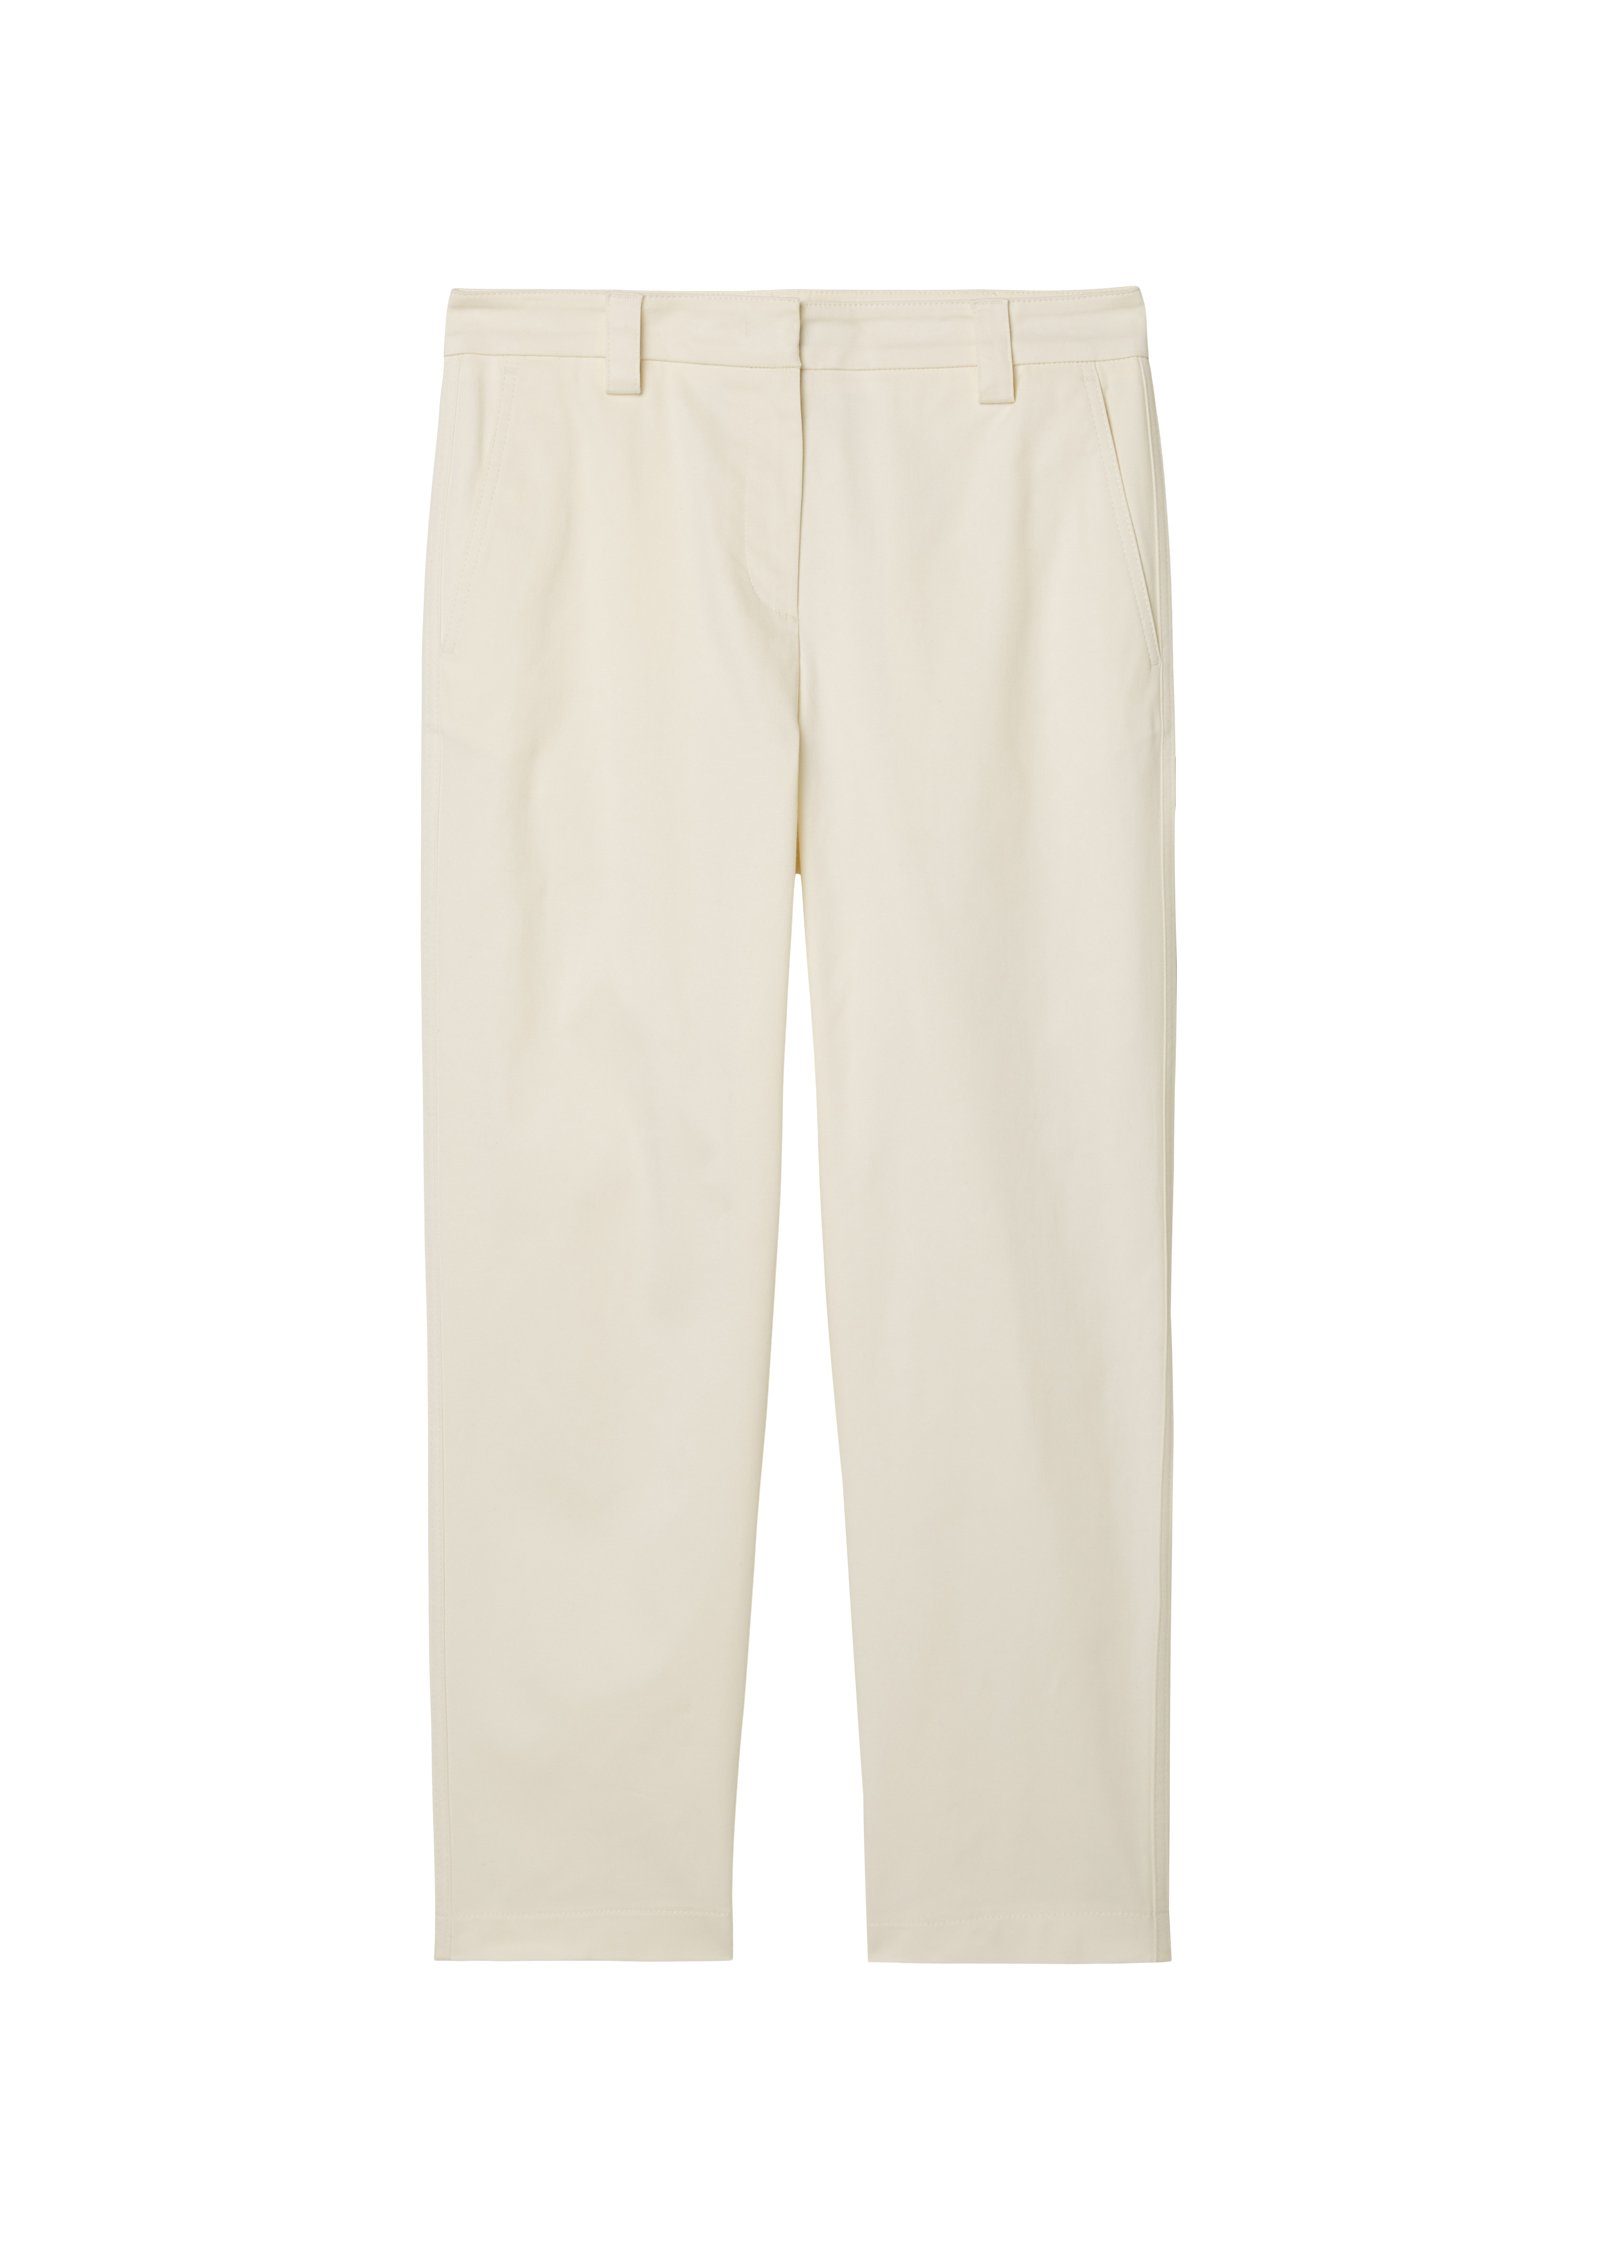 Marc O'Polo 7/8-Hose sand Pants, Chino-Style modern rise, welt tapered modernen style, pocket chalky im high chino leg